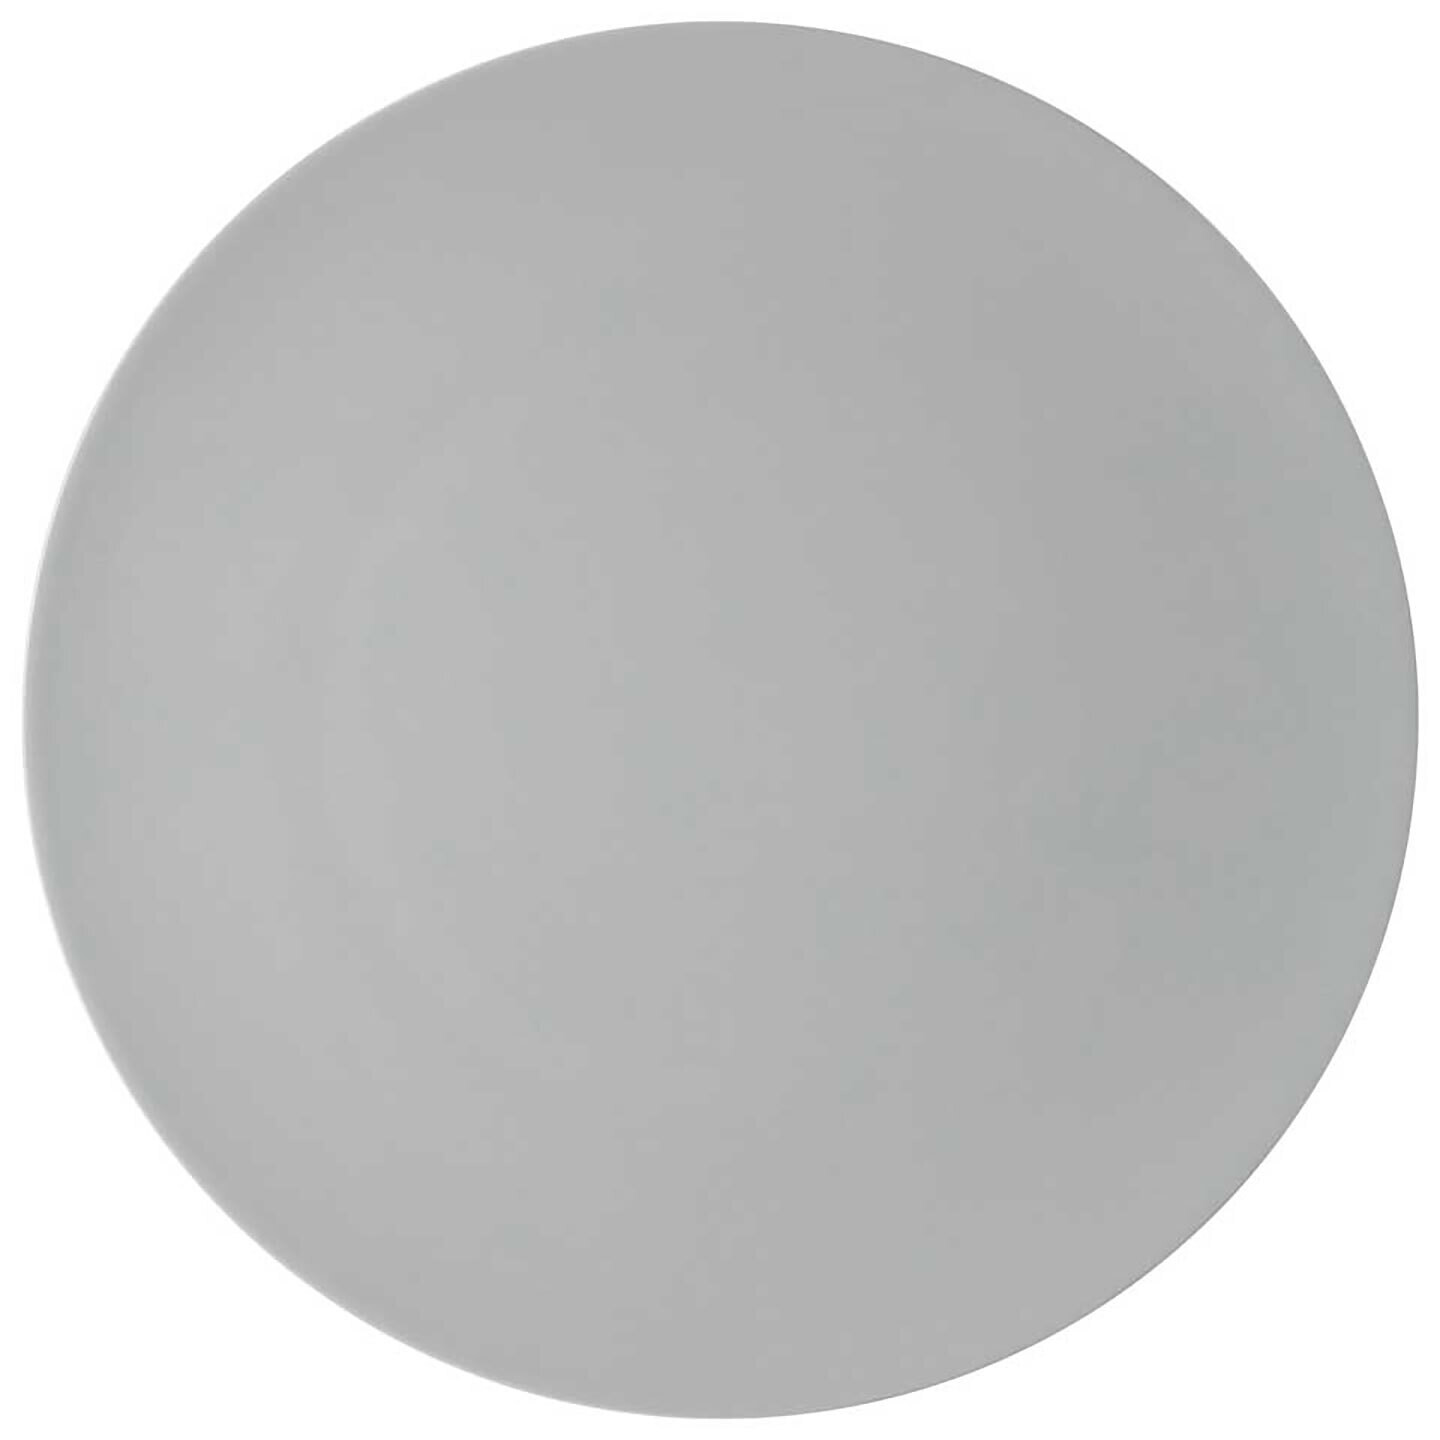 Rosenthal TAC Sensual Grey Service Plate 13 In 11280-403272-10263